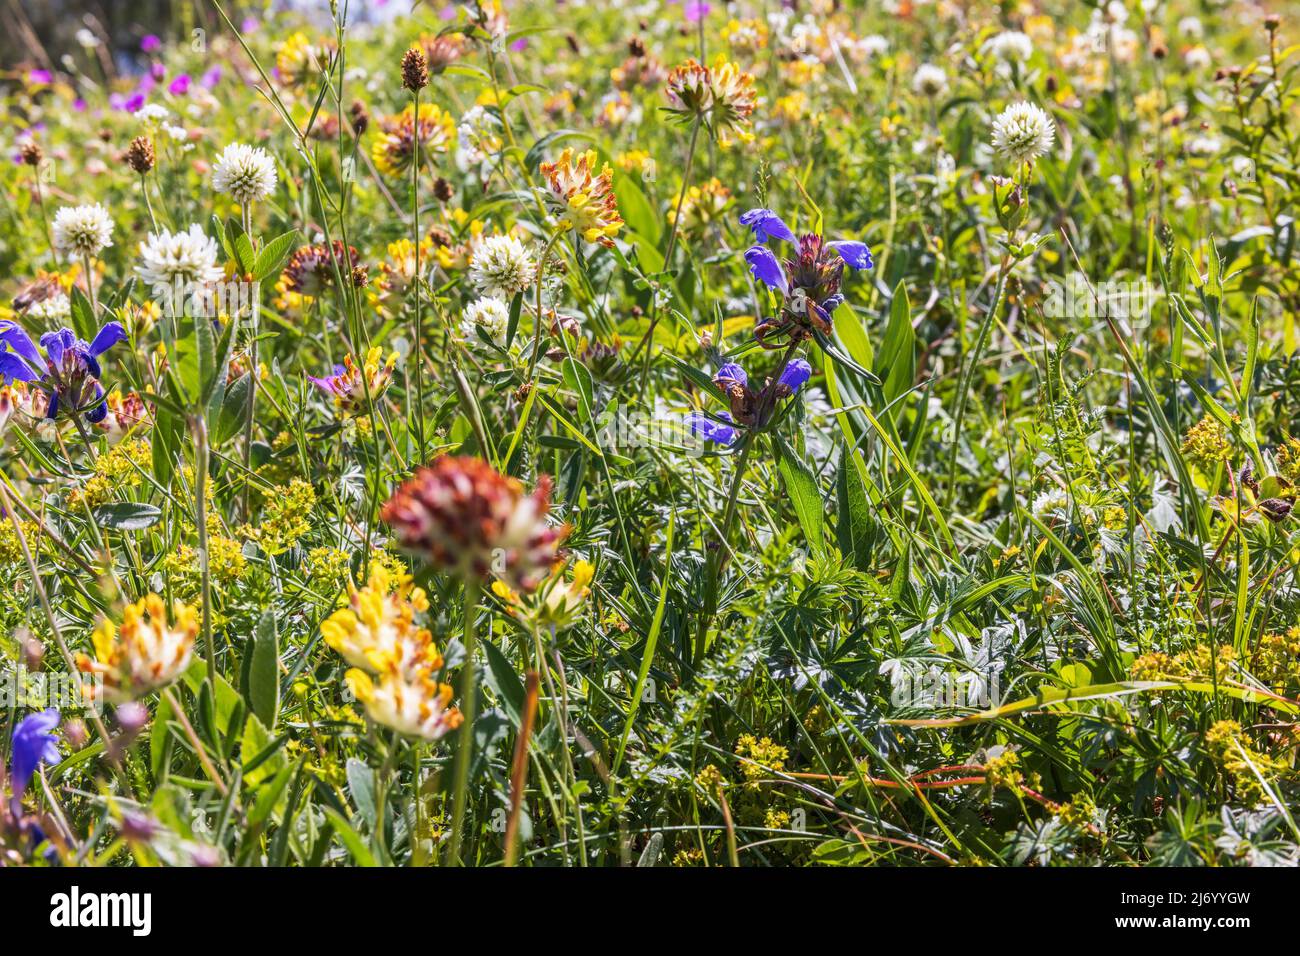 Northern dragonhead flower on a meadow Stock Photo